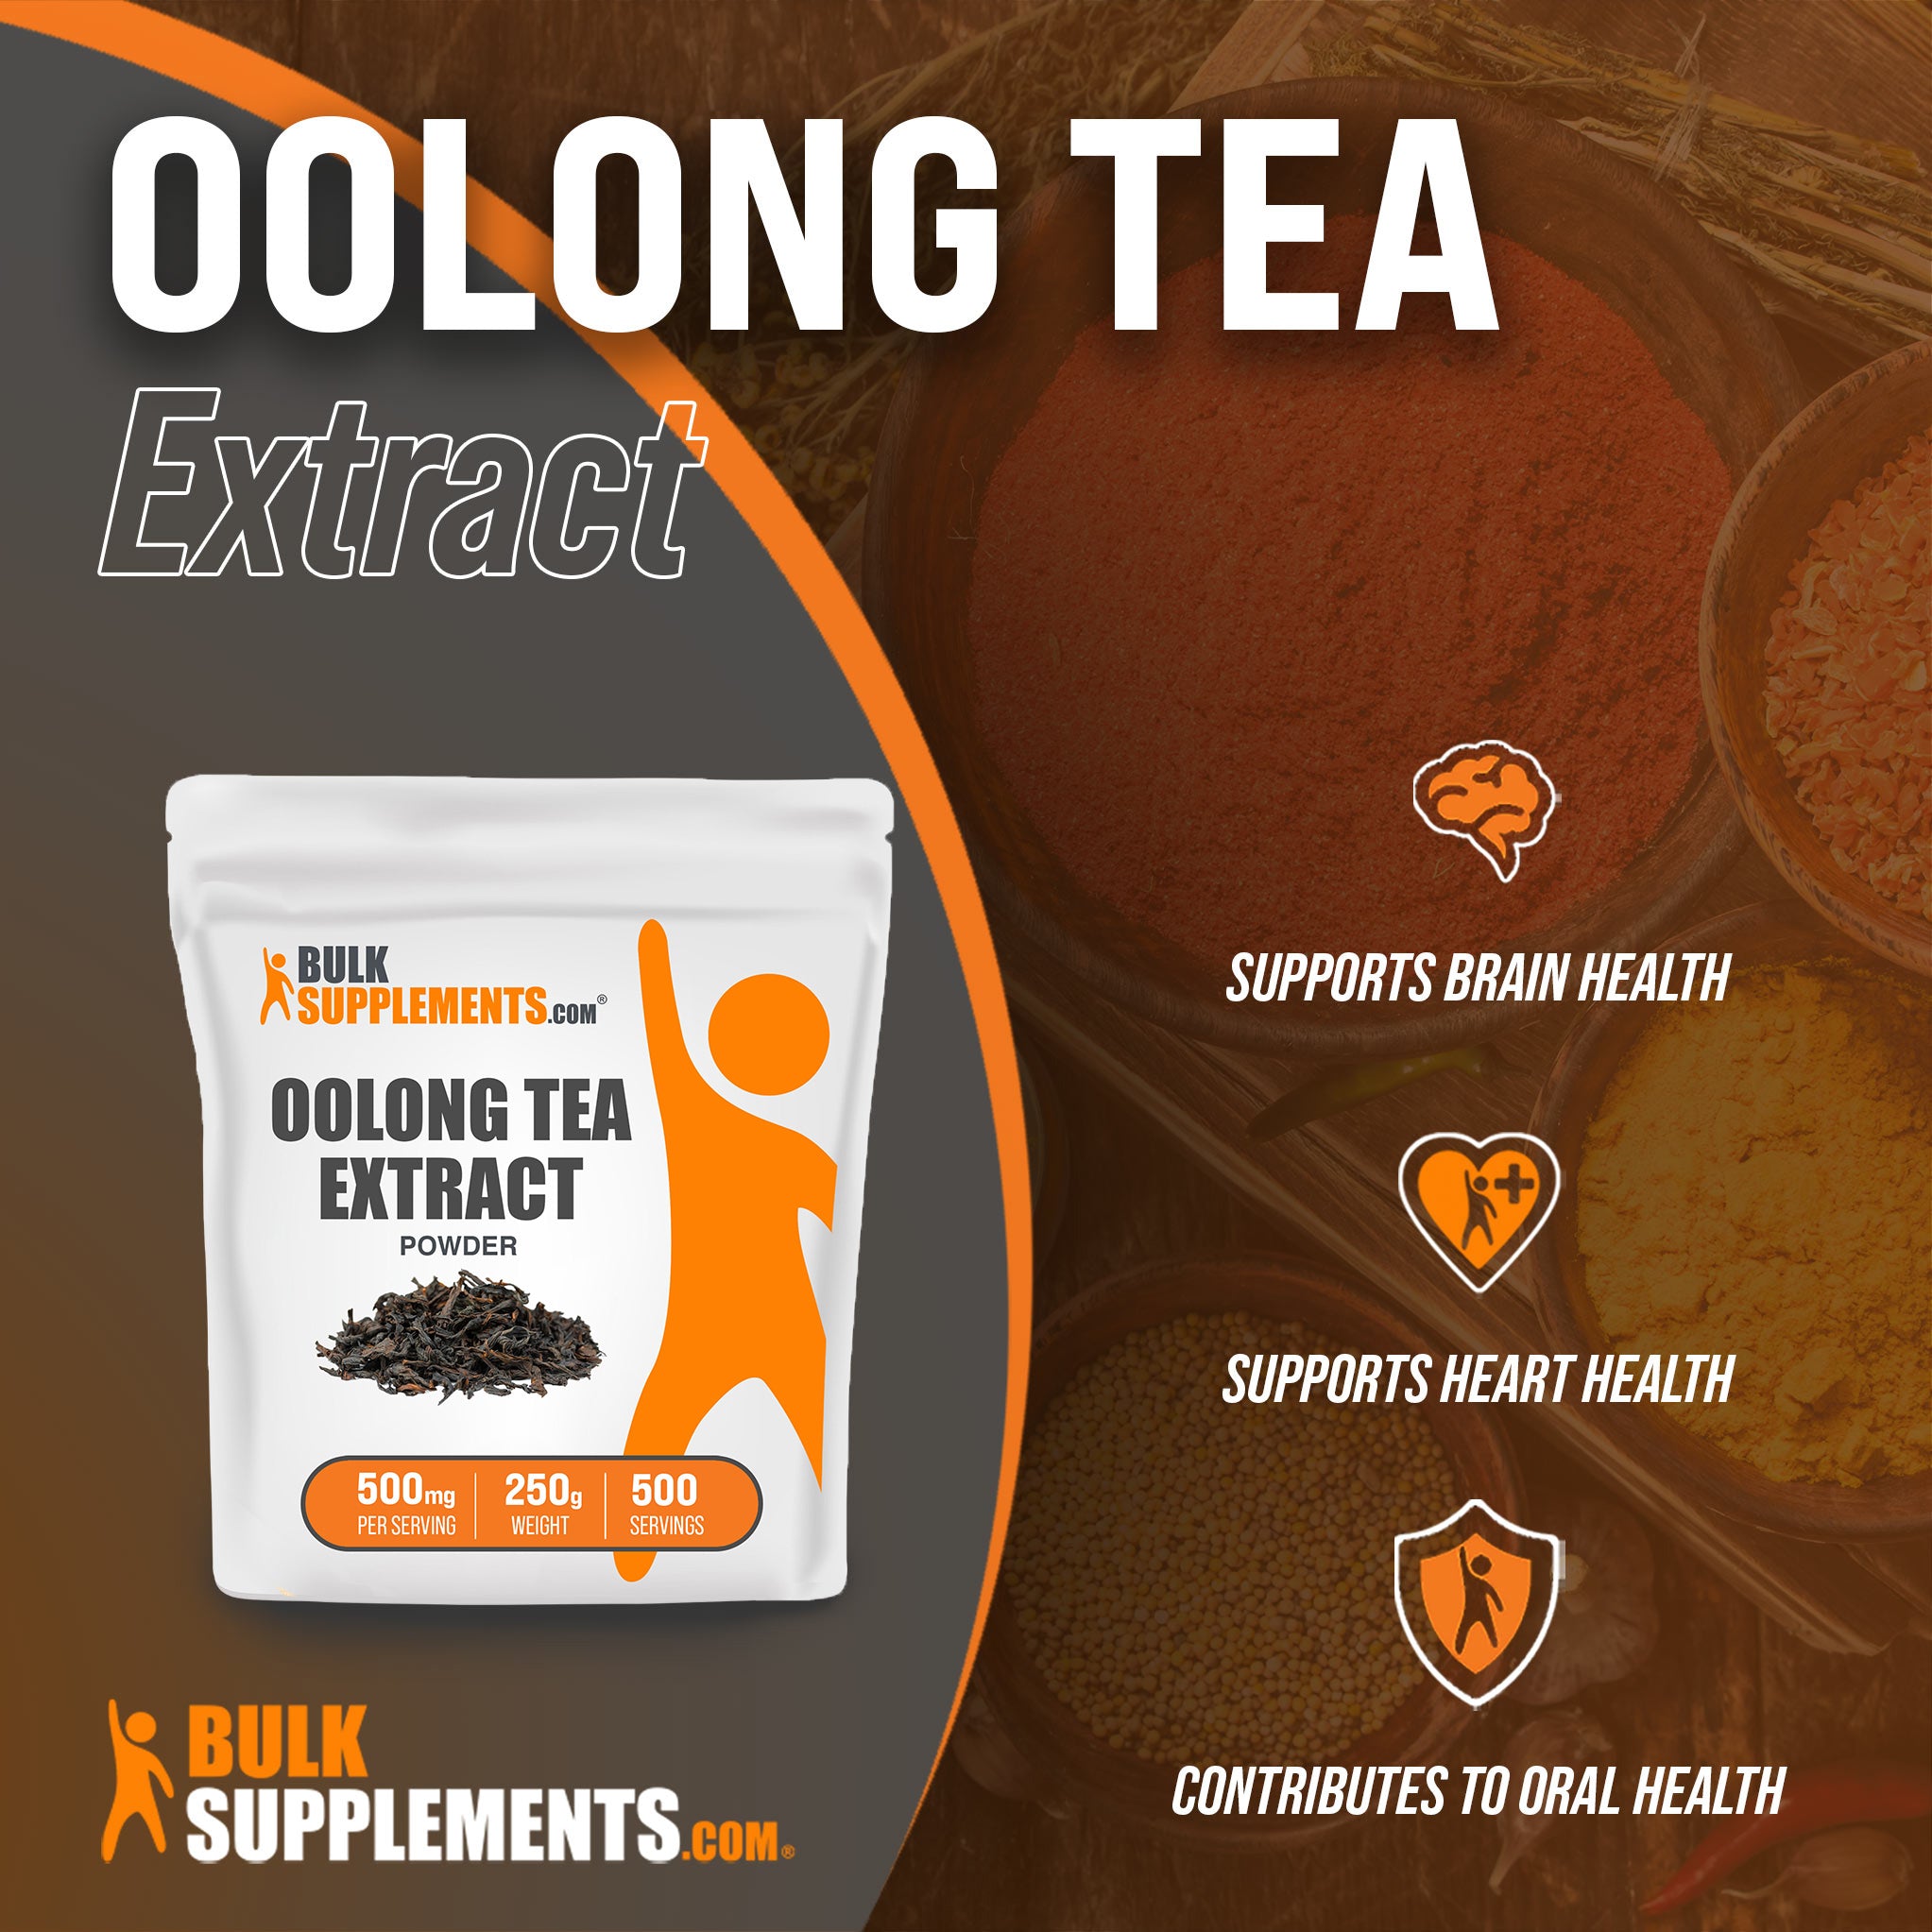 Benefits of Oolong Tea Extract: supports brain health, supports heart health, contributes to oral health